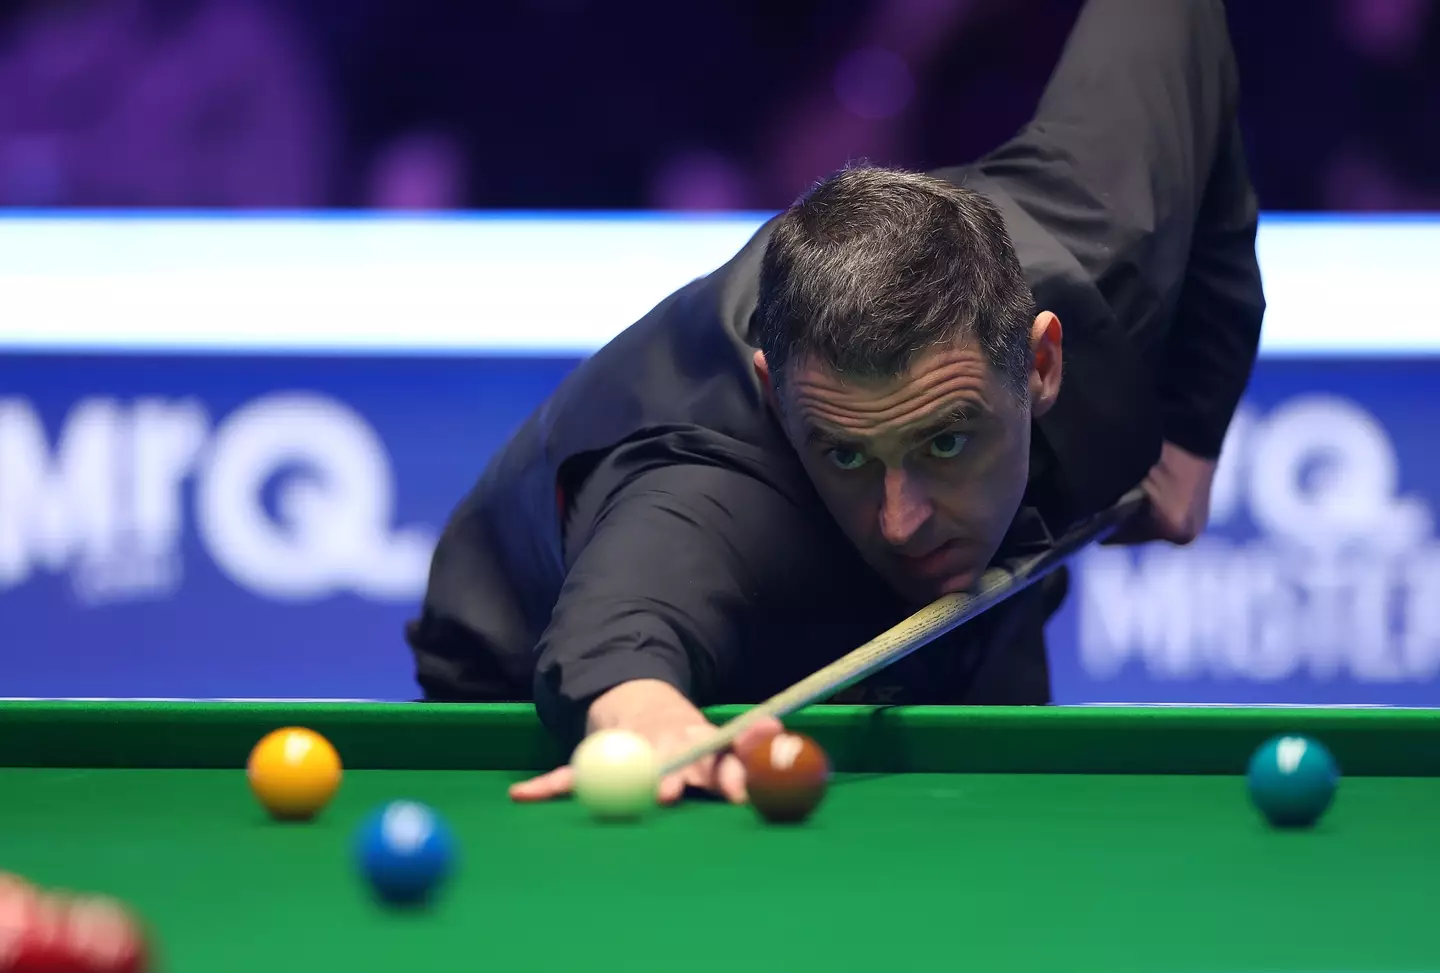 O'Sullivan won in the first round of the Masters despite his opponent Ding Junhui making a 147 maximum break.